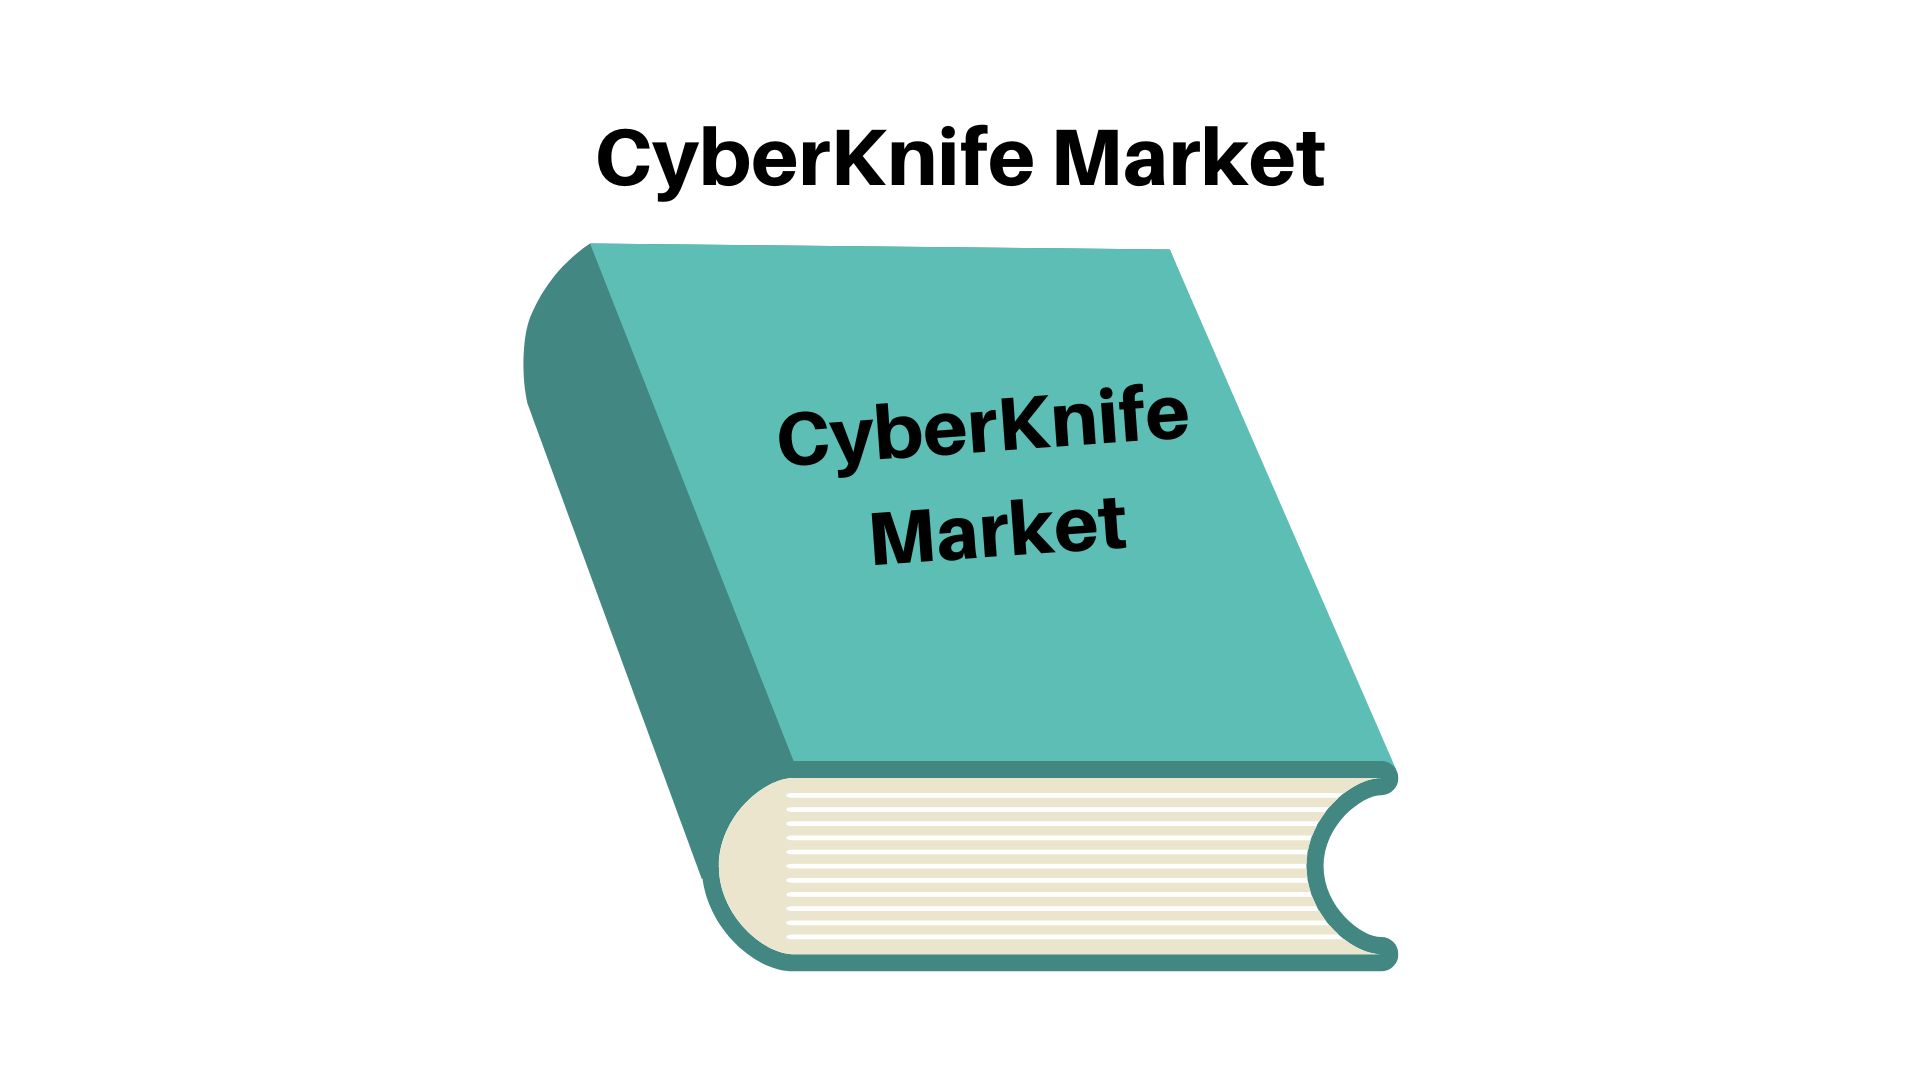 CyberKnife Market Is Estimated To Grow With A CAGR of 18.7% from 2023-2033